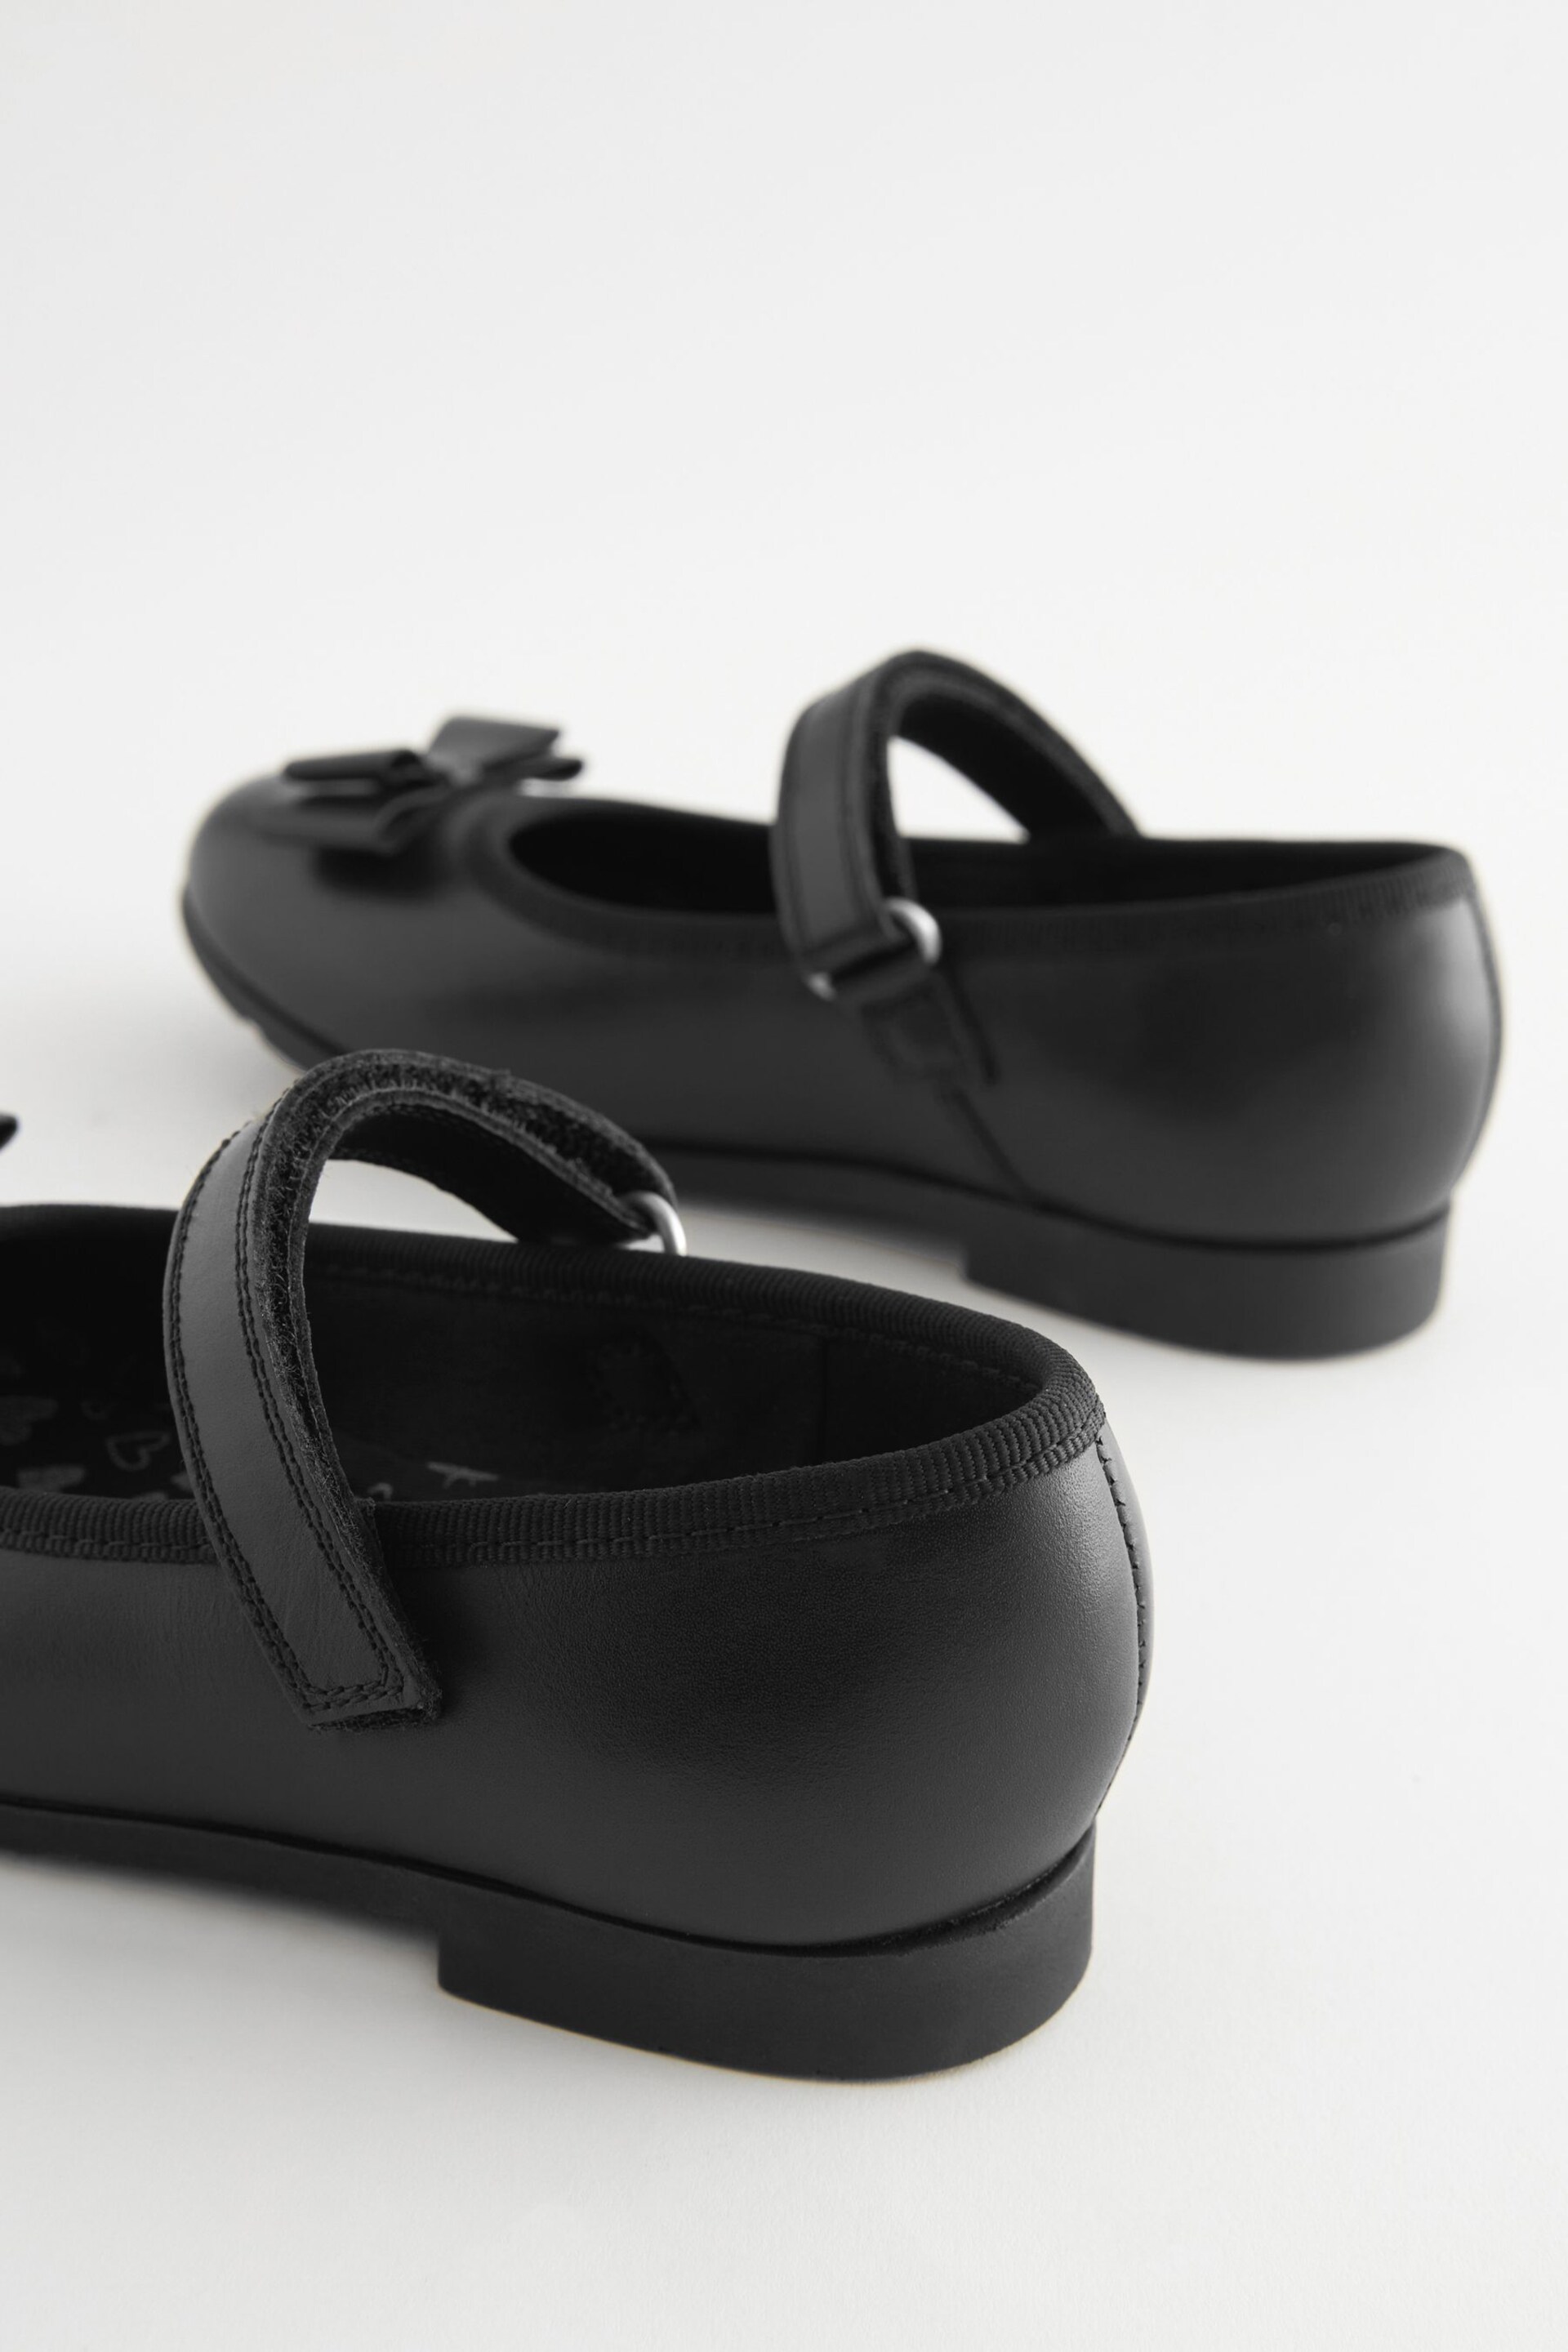 Black Wide Fit (G) School Leather Bow Mary Jane Shoes - Image 5 of 6